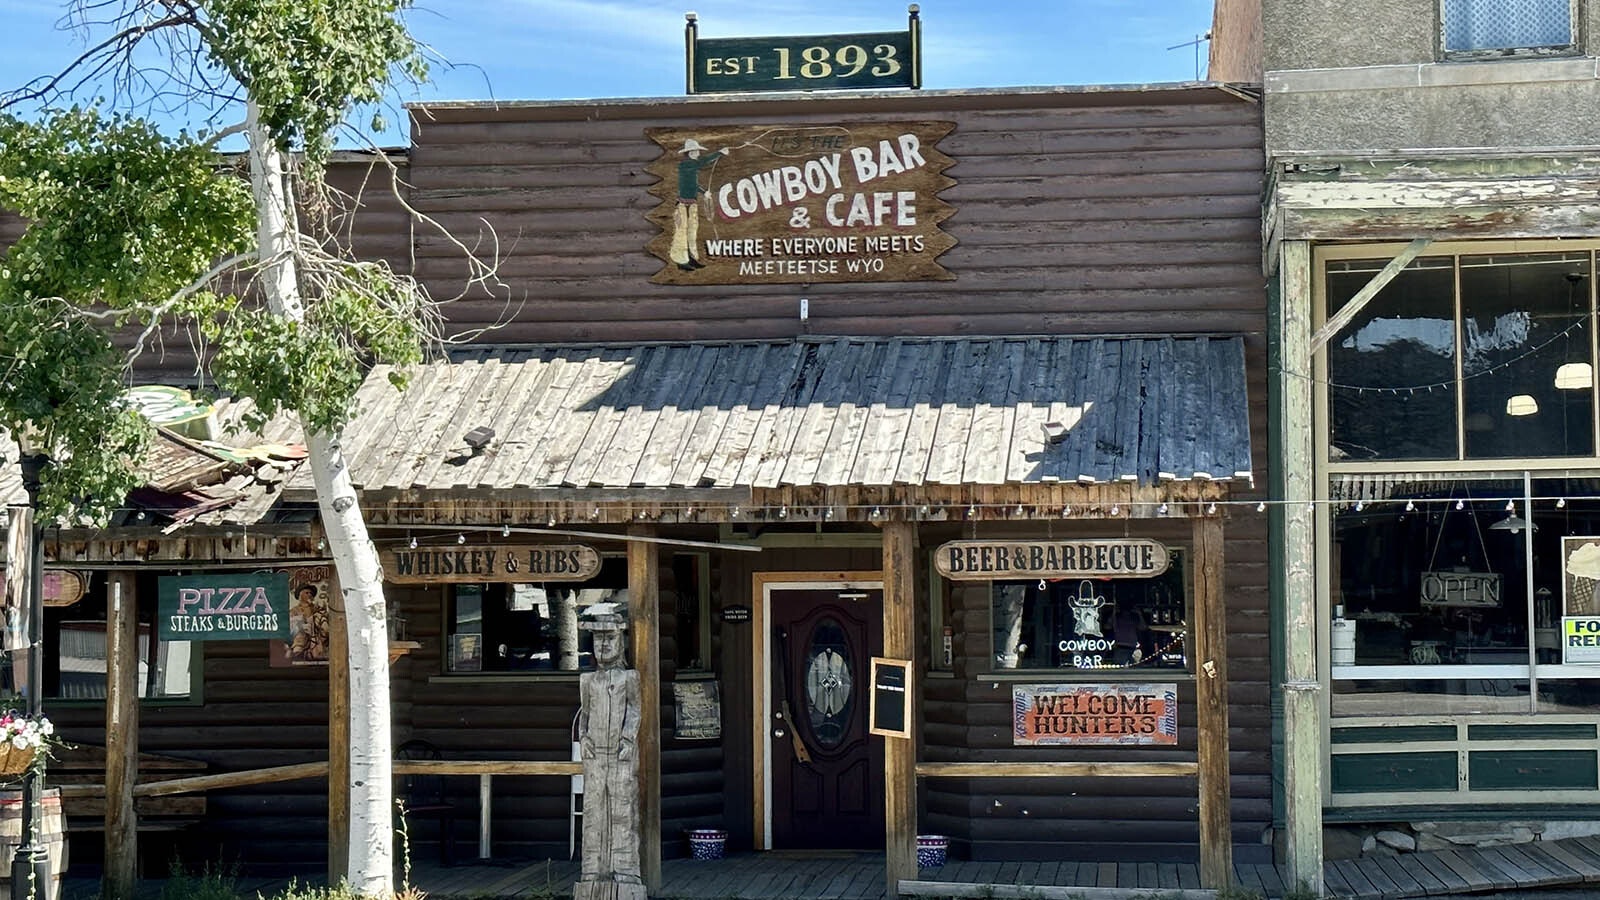 The Cowboy Bar in Meeteetsee is Wyoming's most famous outlaw bar, and it's for sale, listing for $395,000.